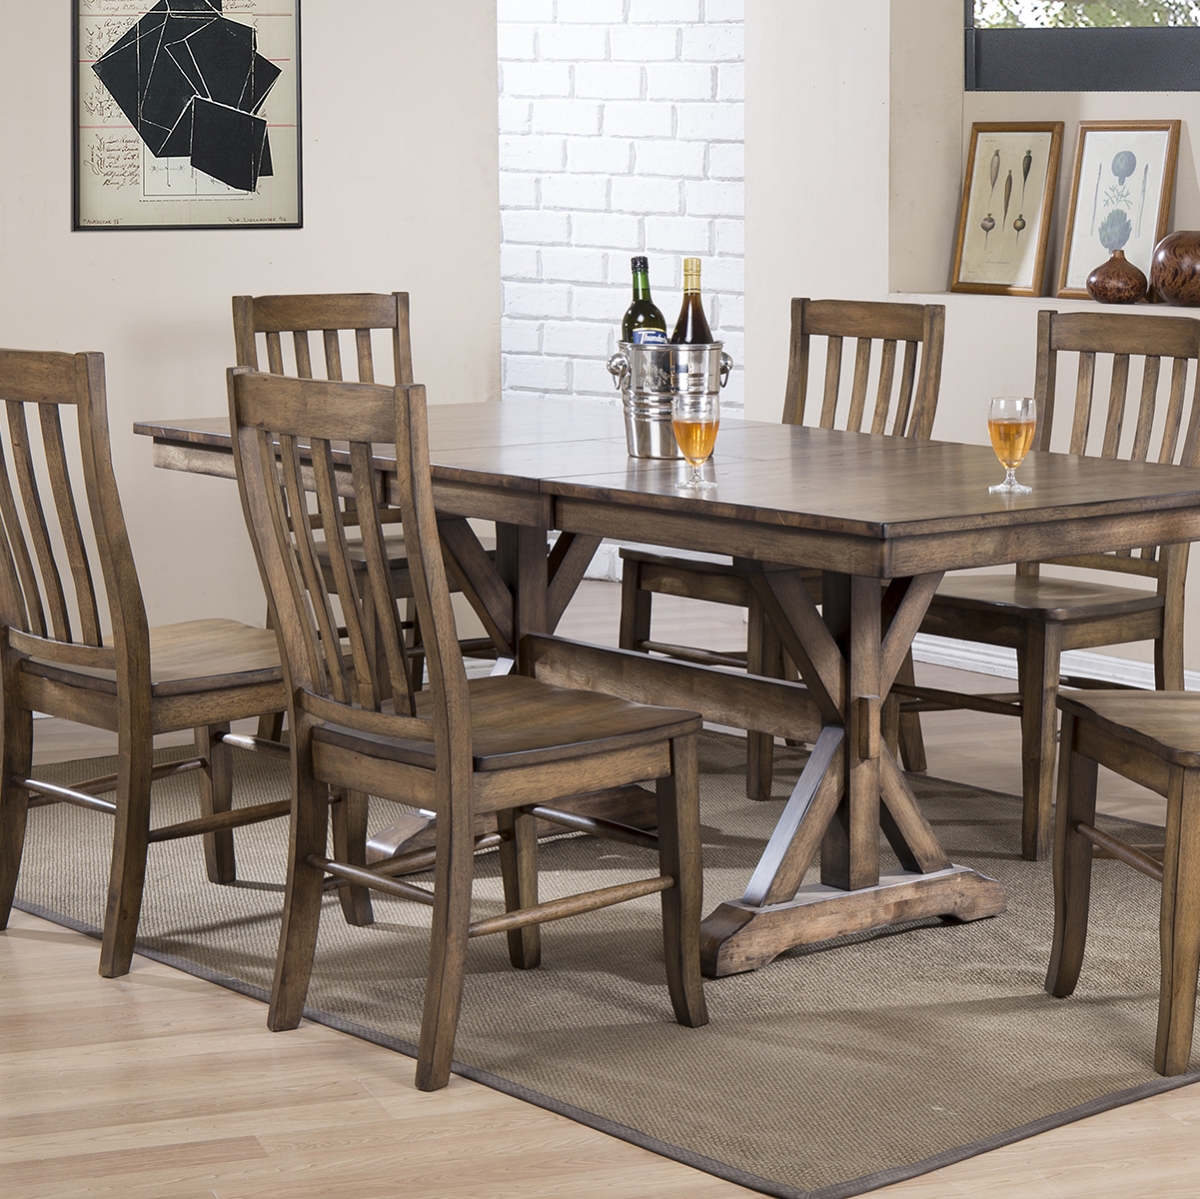 Picture of Carmel 7 Piece Dining Room Set